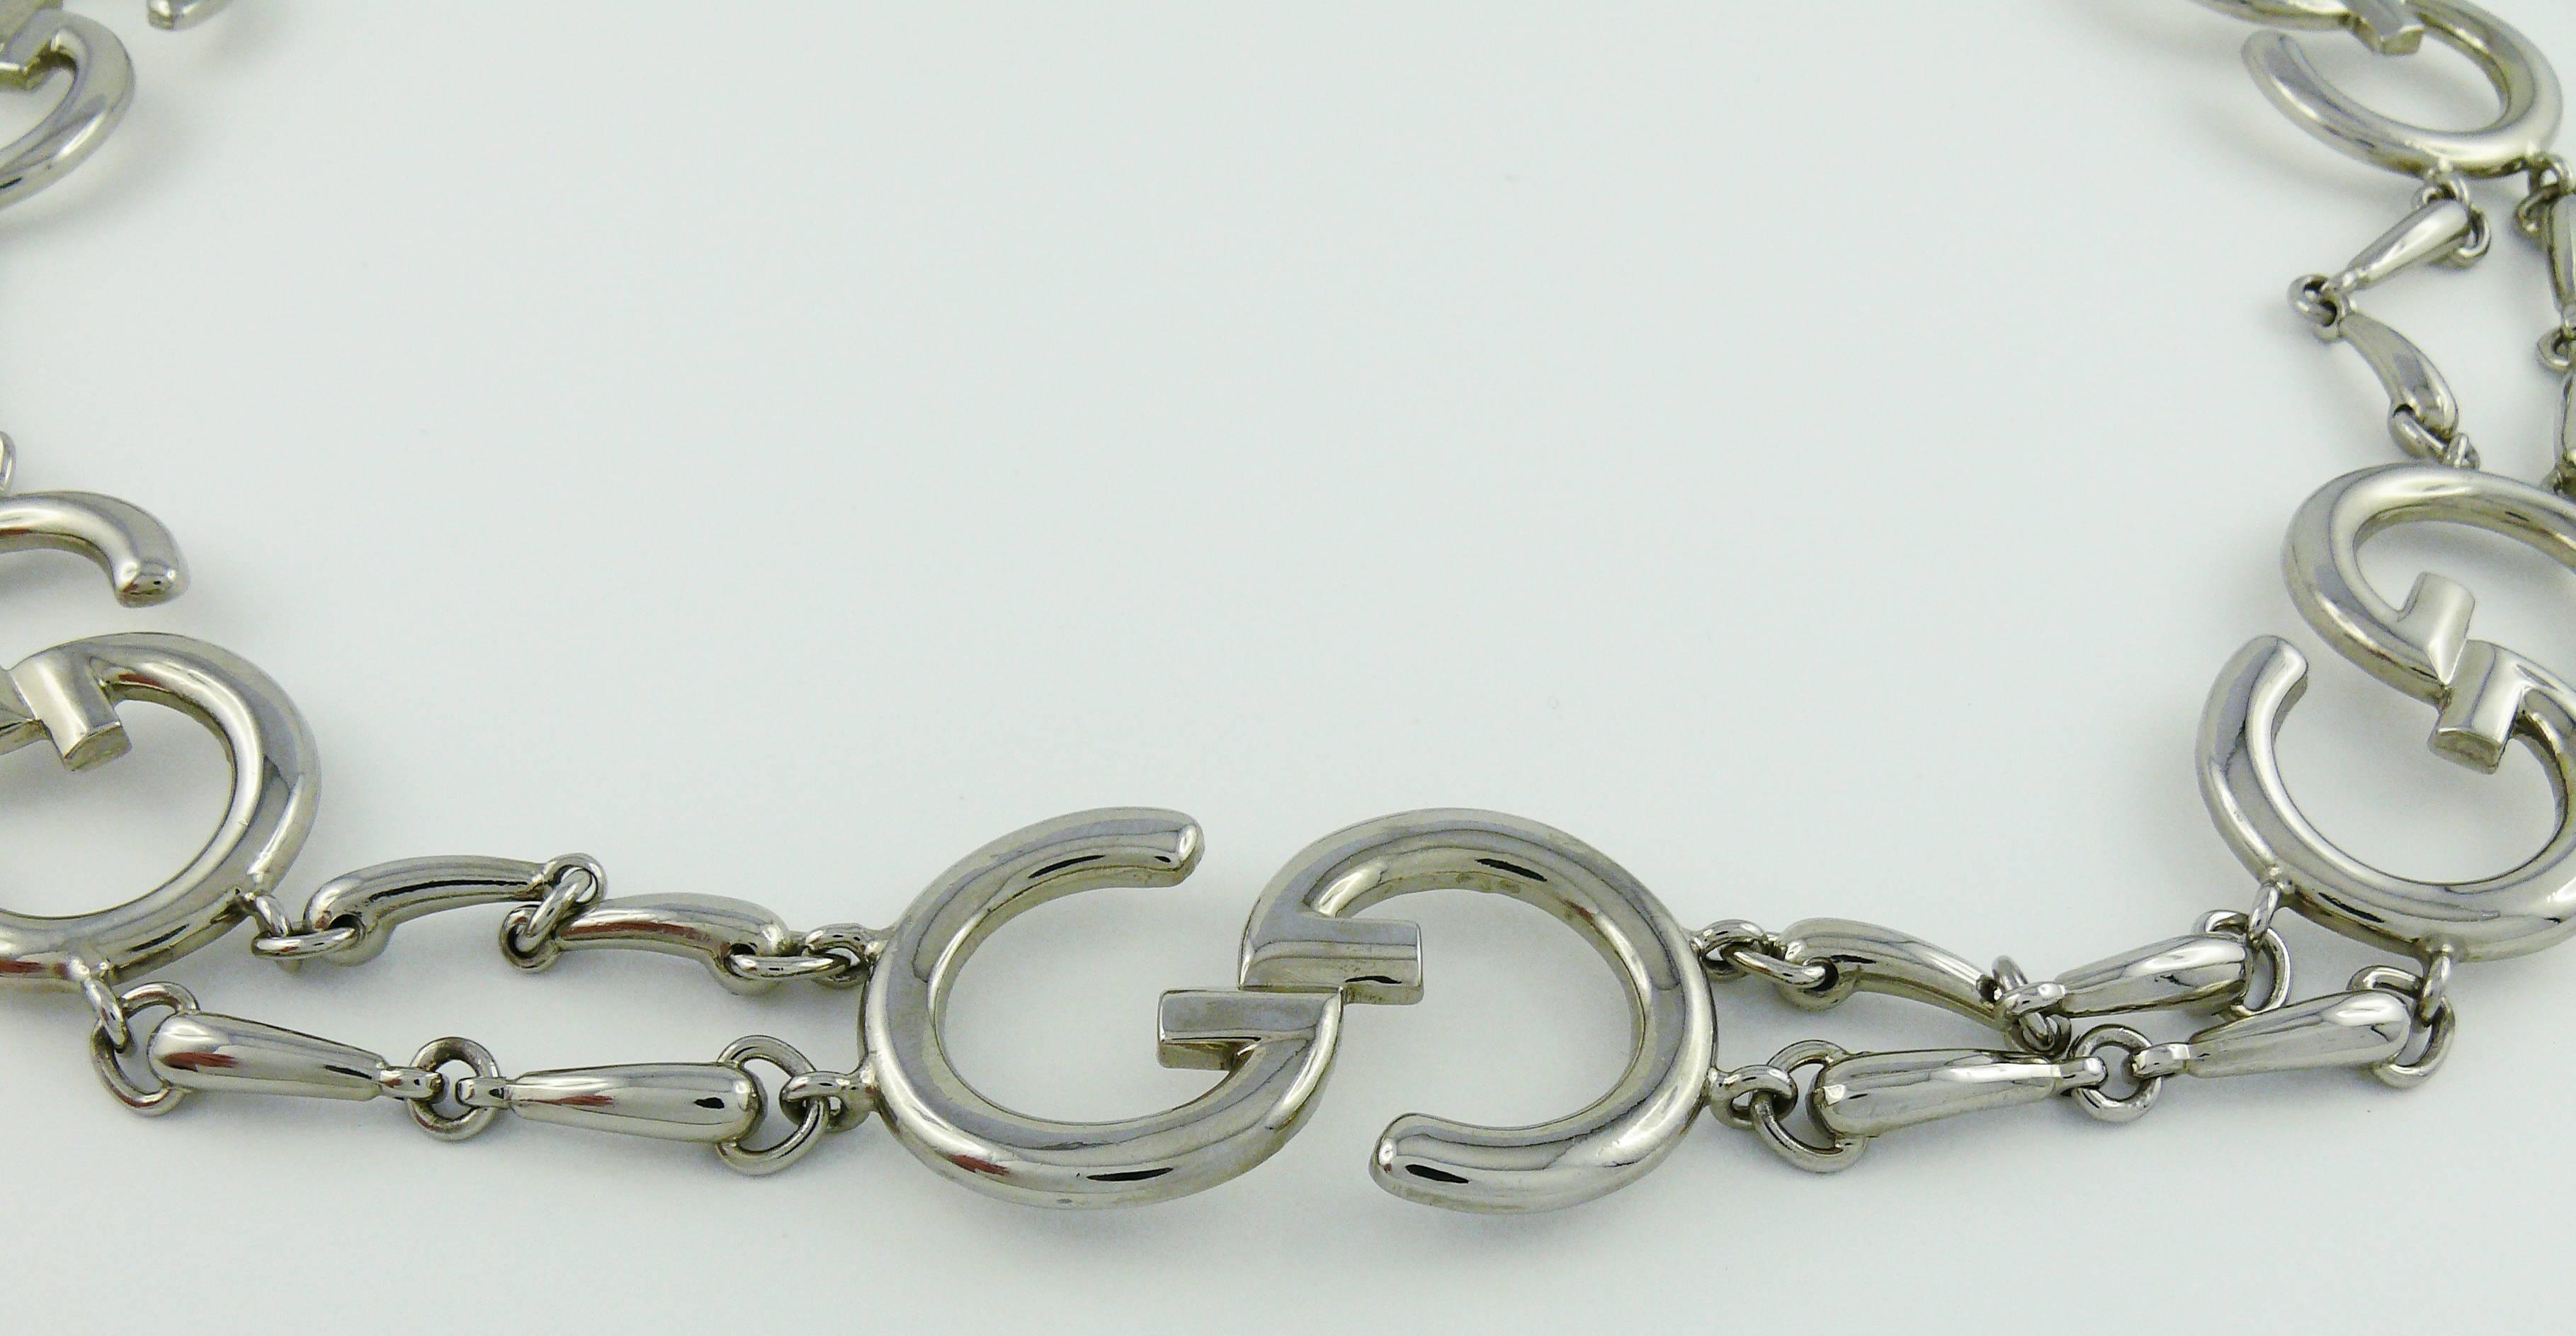 GUCCI vintage 1970s silver toned iconic belt featuring Guccio Gucci GG initials and horsbit links.

Secure clasp system topped with G initial.

Embossed GUCCI an GUCCI Italy.

Indicative measurements : length approx. 73 cm - 74 cm (28.74 inches -